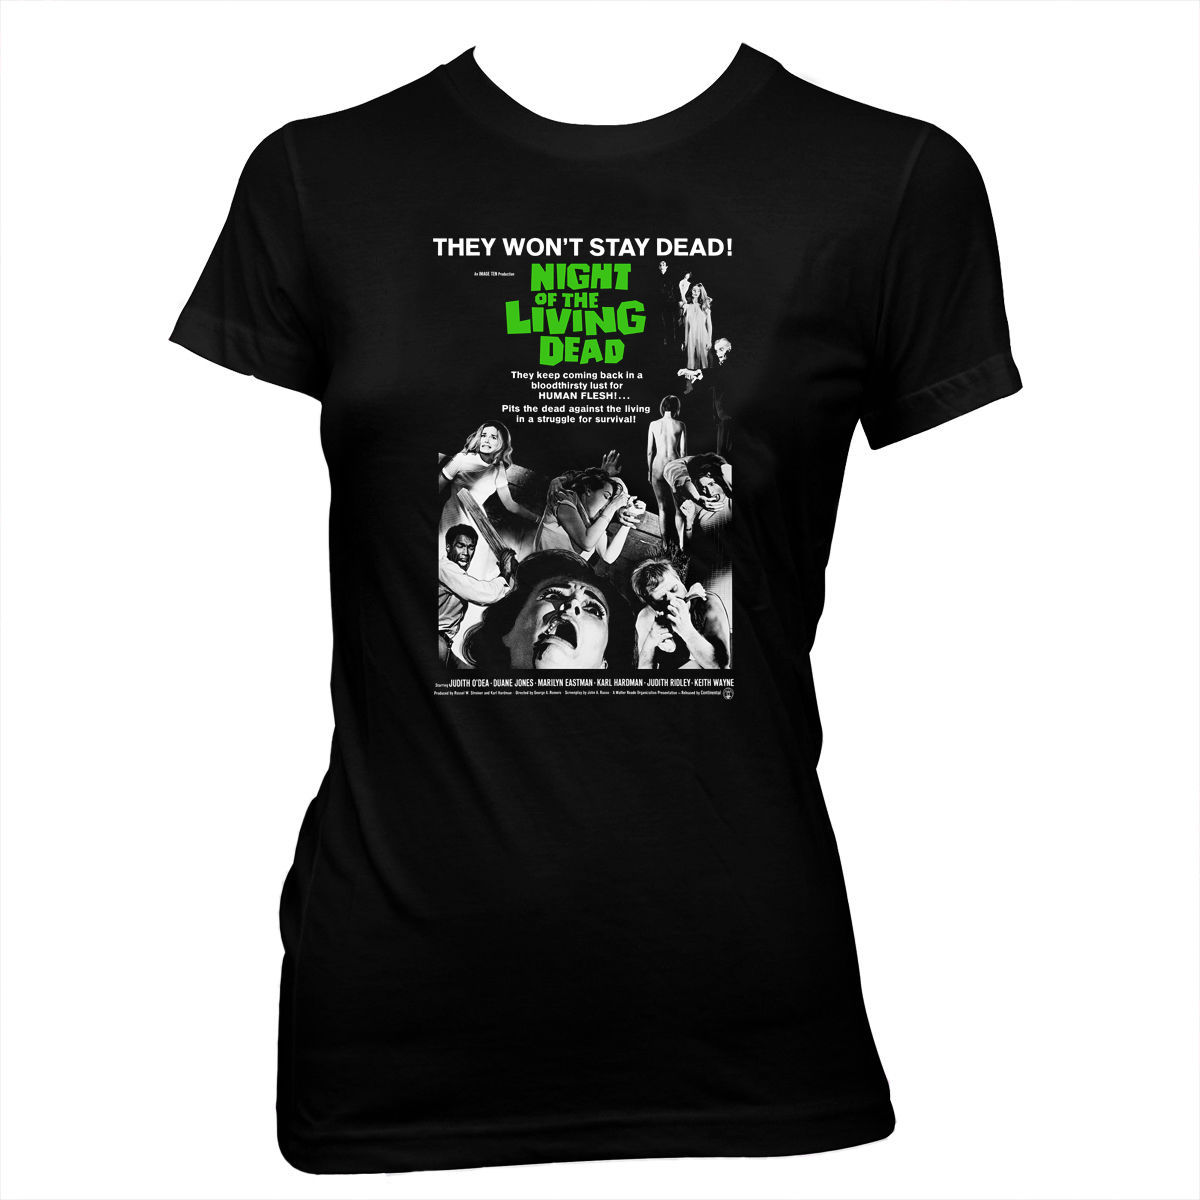 Night of the Living Dead - Movie Poster - Screened Women's 100% cotton t-shirt